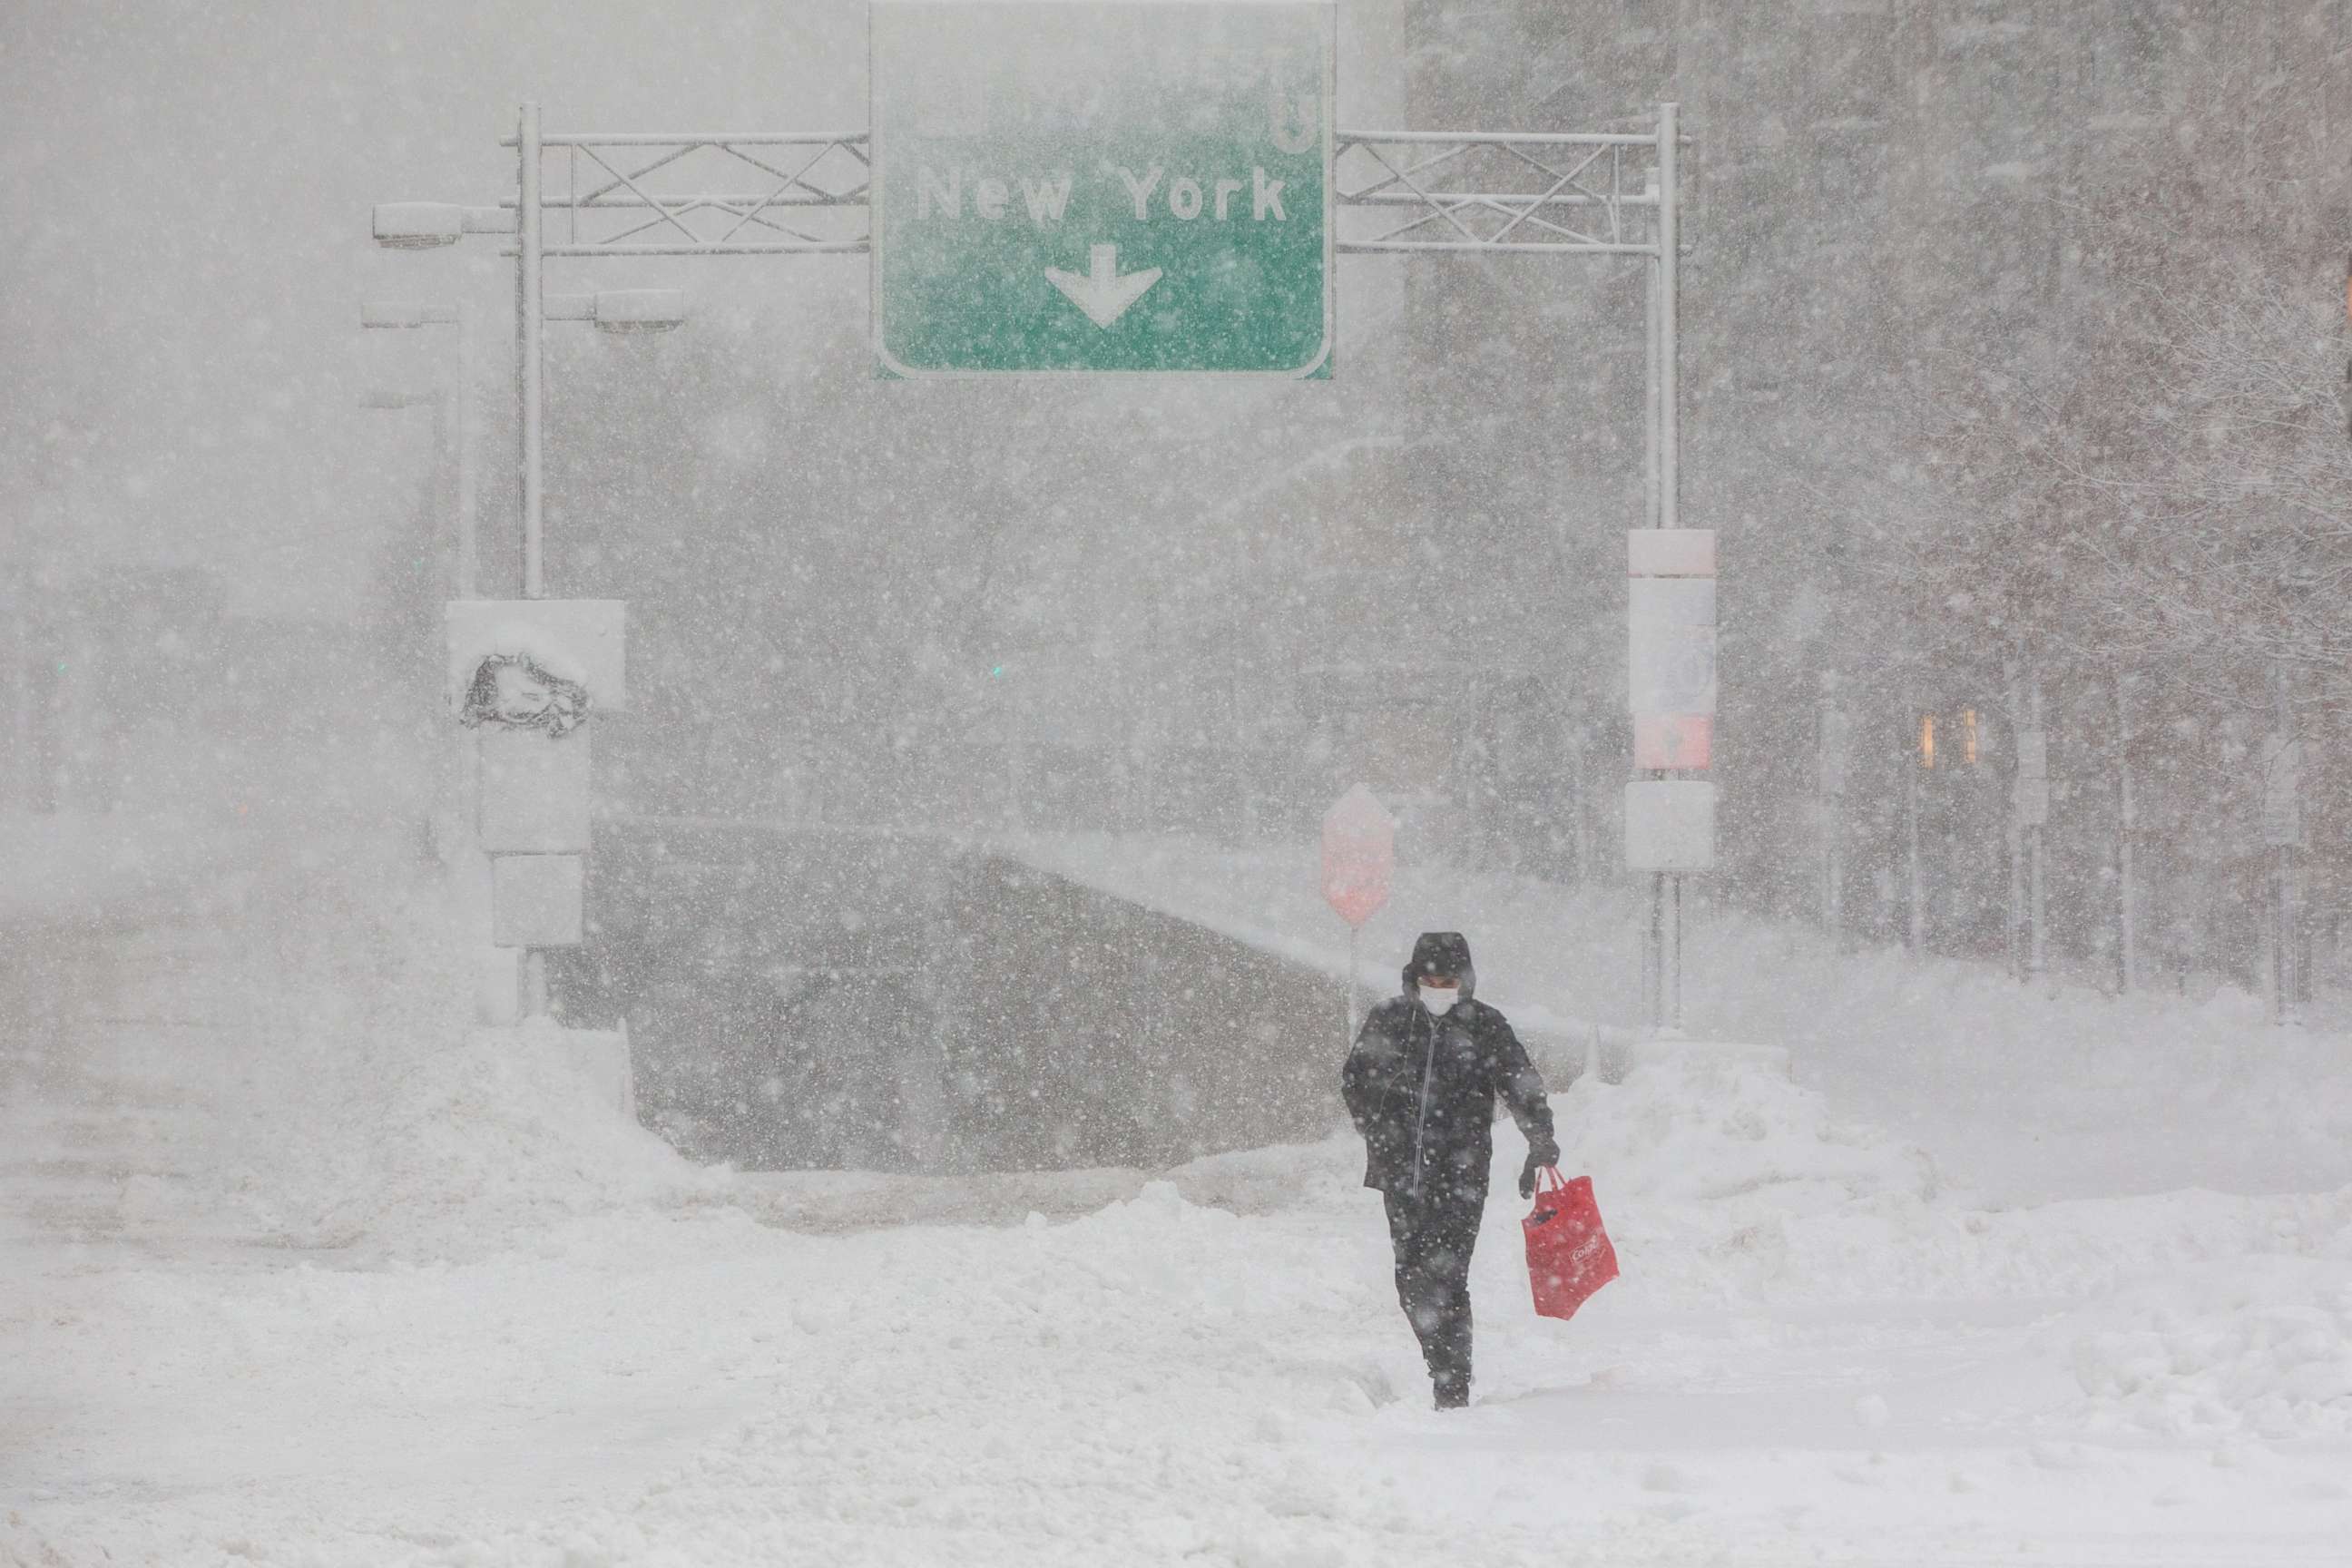 PHOTO: A pedestrian crosses in front of the entrance to I-90 on Dec. 17, 2020 in Boston, Massachusetts.